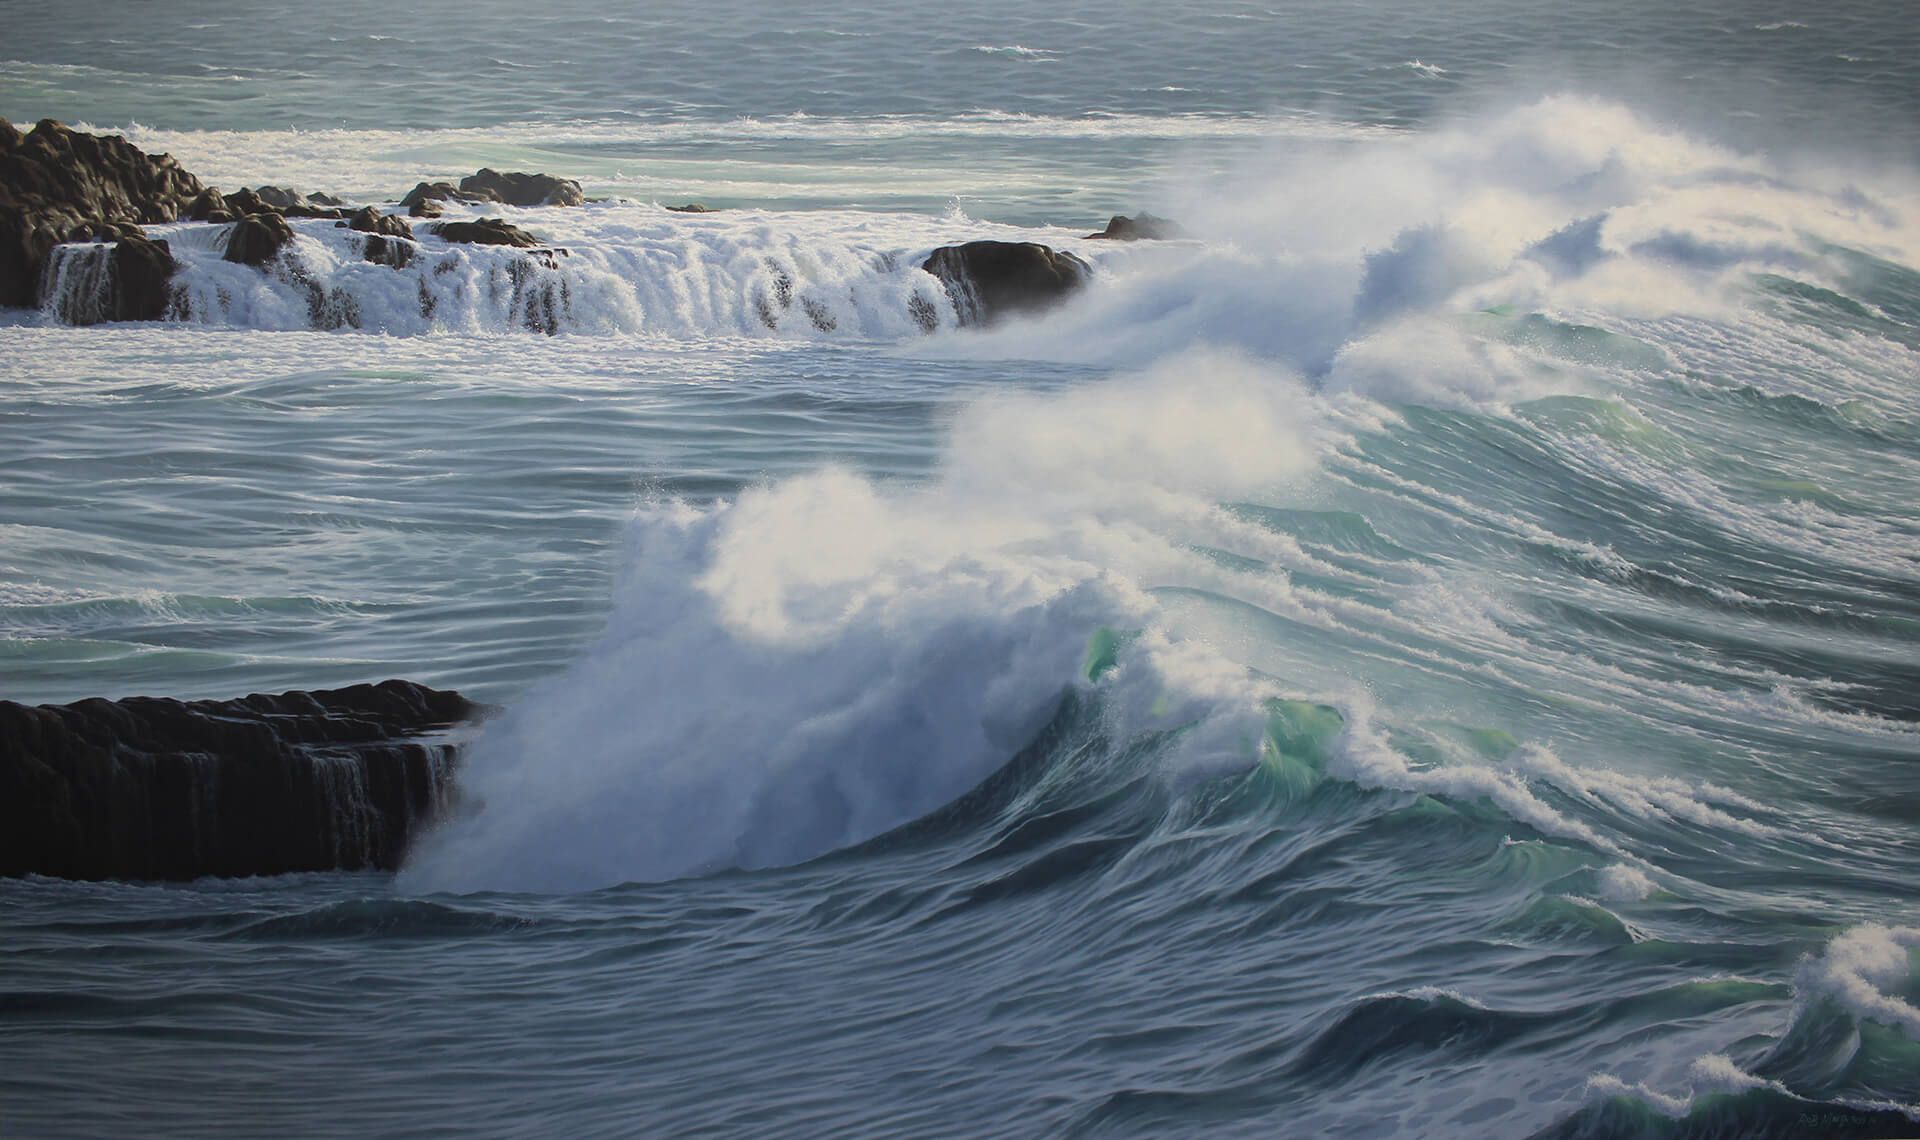 Photorealistic painting of waves crashing on a rocky beach